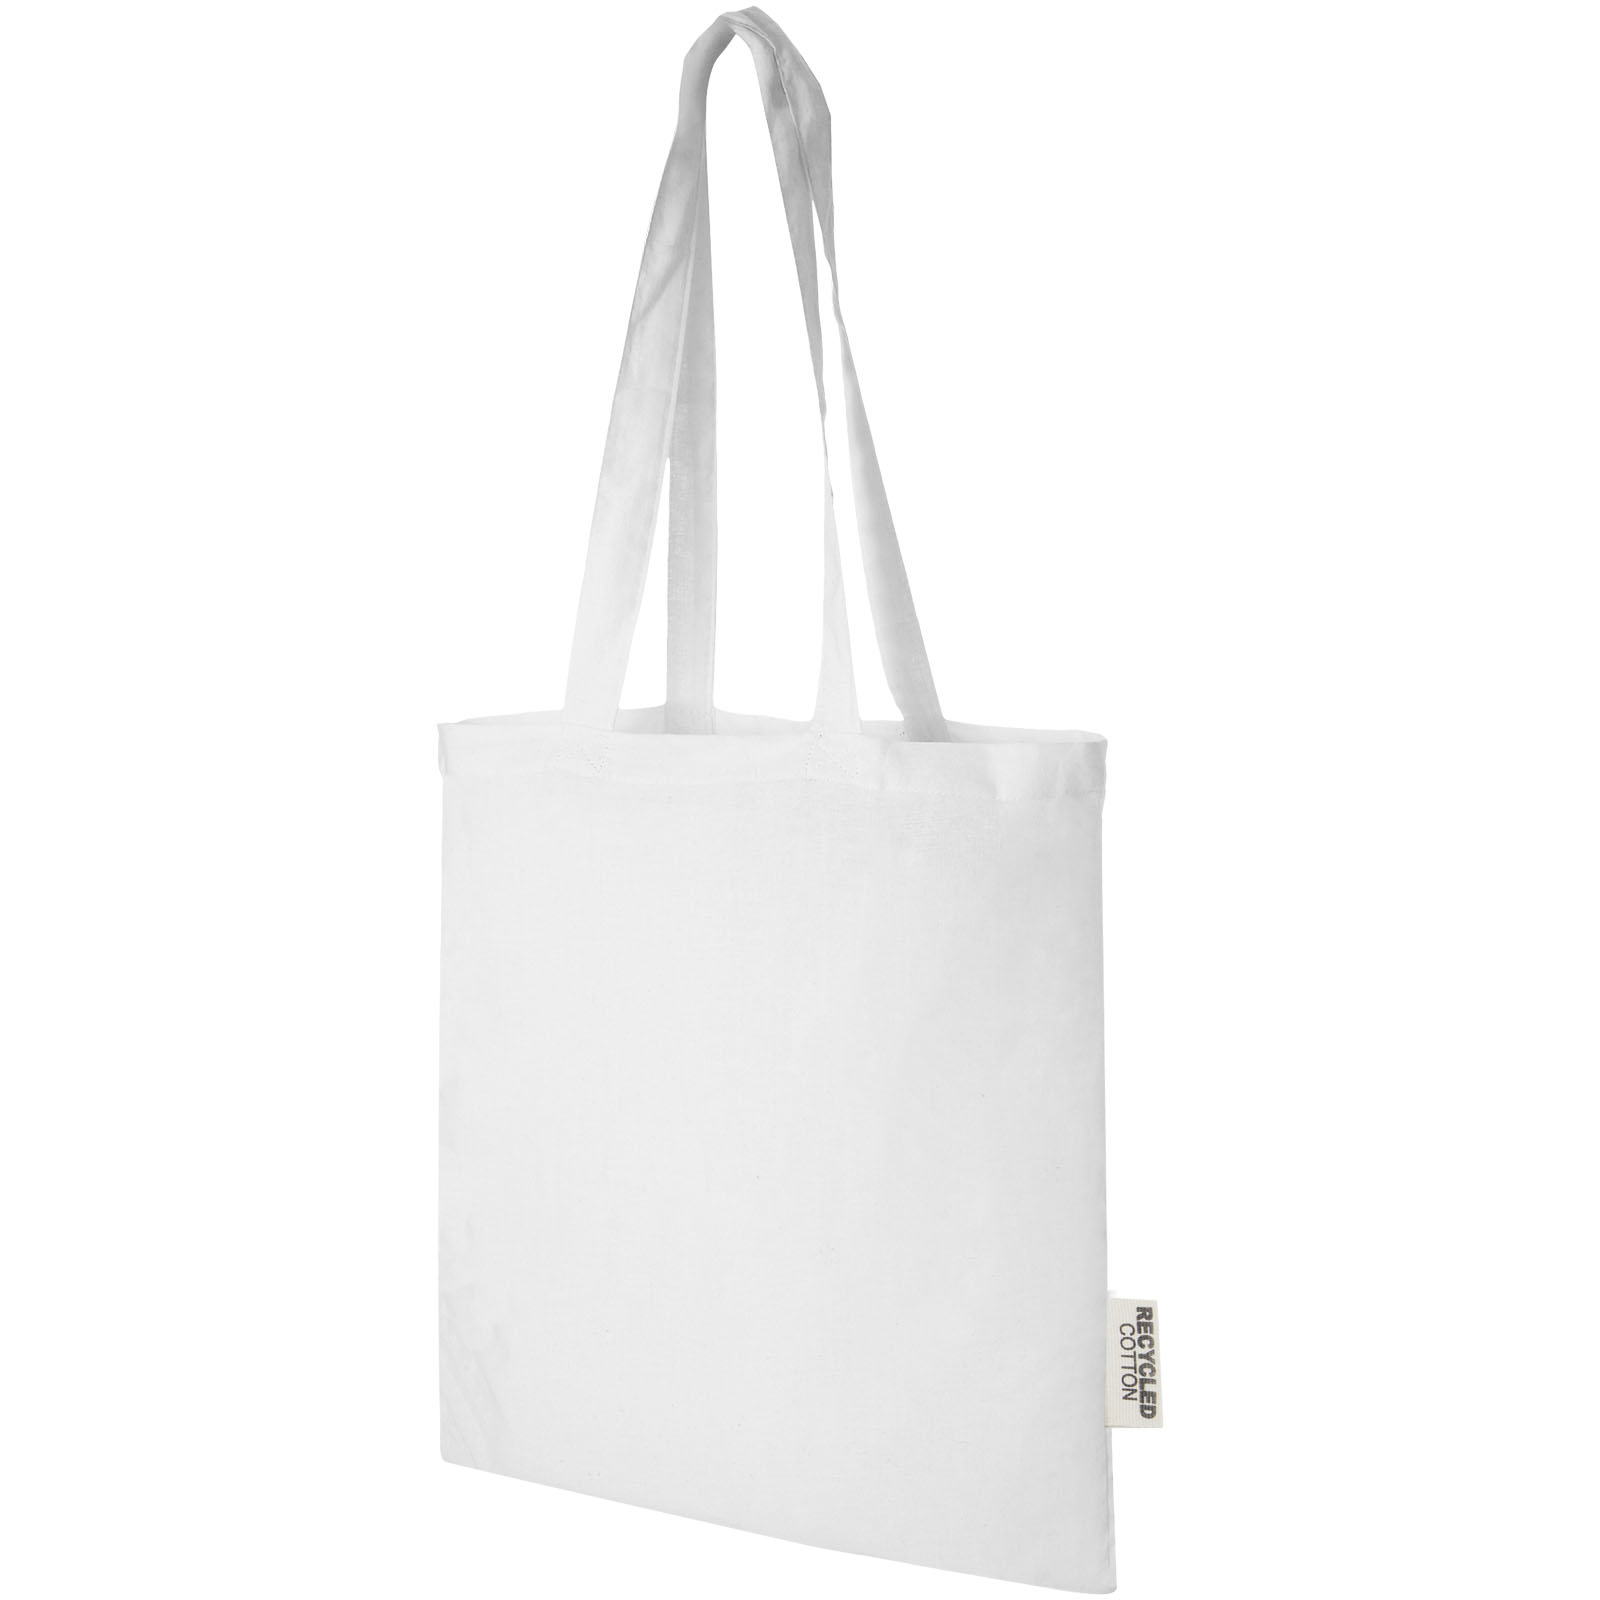 Shopping & Tote Bags - Madras 140 g/m2 GRS recycled cotton tote bag 7L